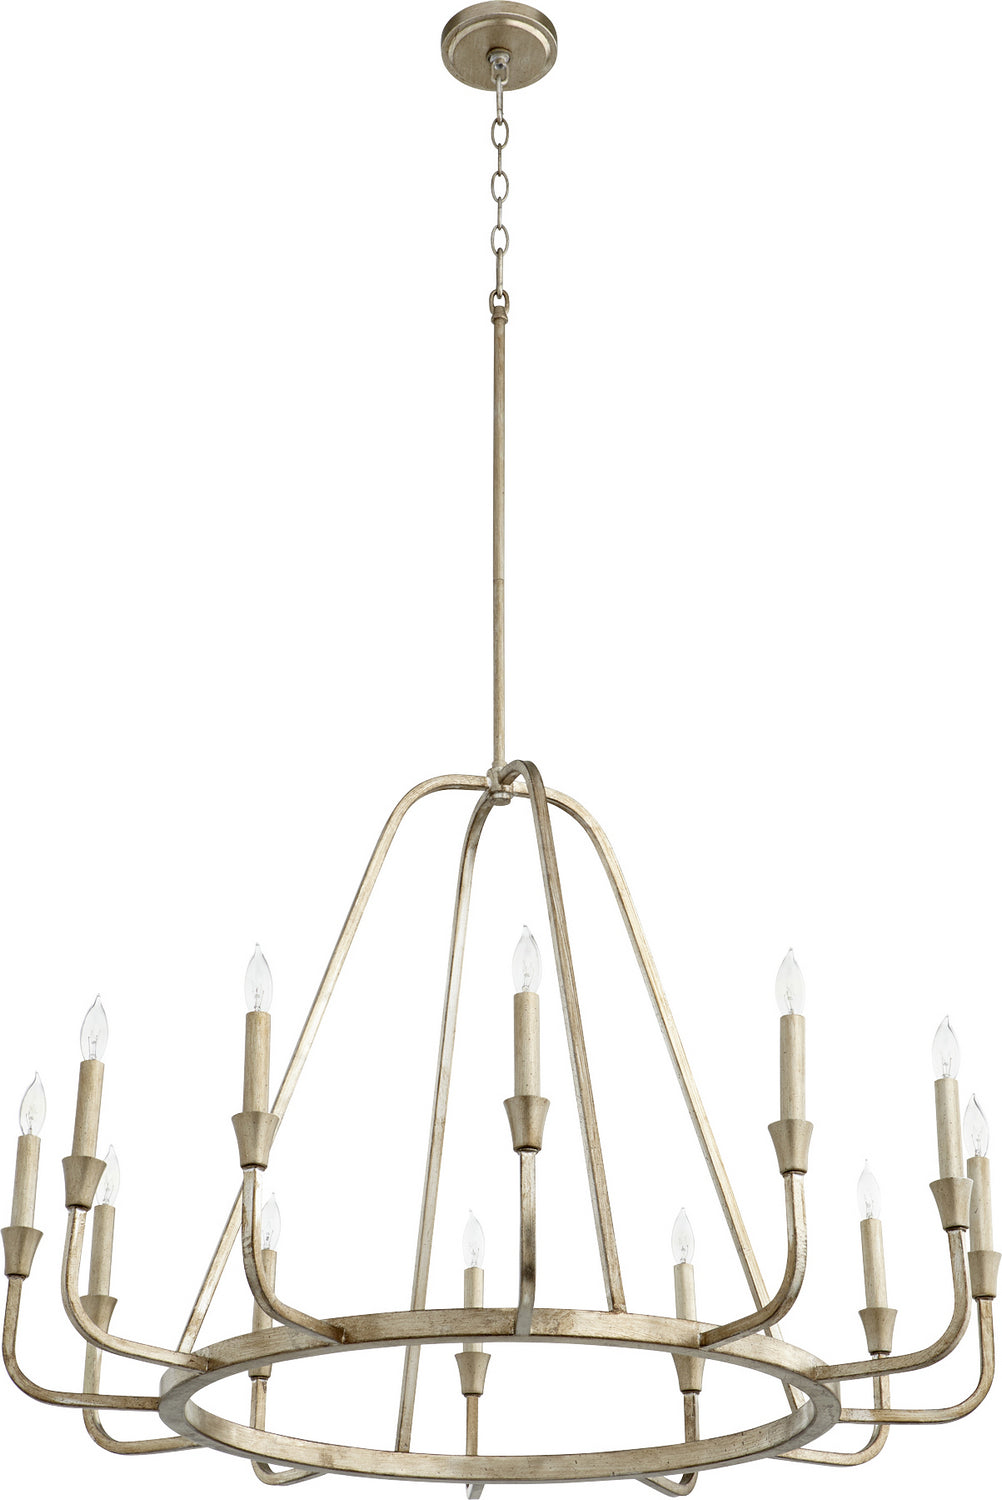 Quorum - 6314-12-60 - 12 Light Chandelier - Marquee - Aged Silver Leaf